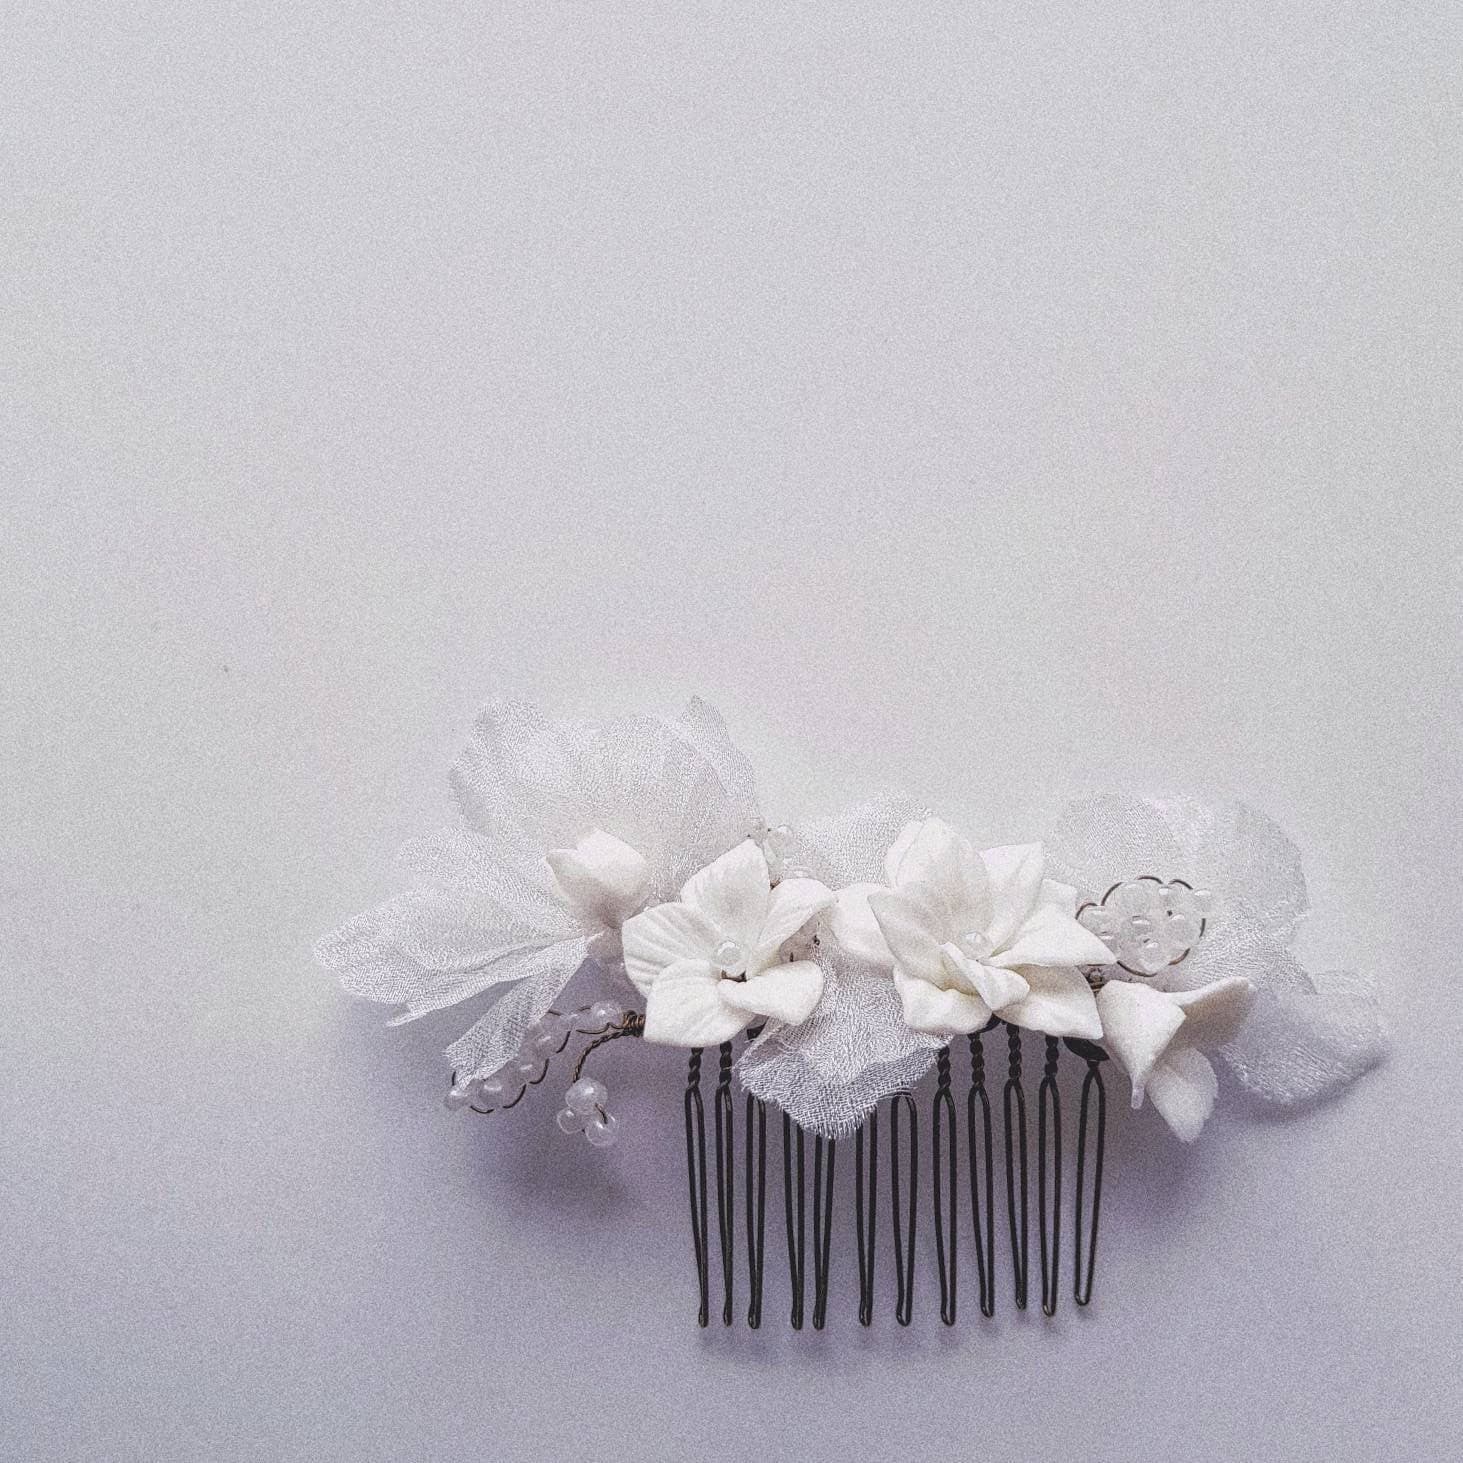 BOUTIQUEBYBRENDALEE PORCELAINE Sheer flower Haircomb White Flowers Hairpins Bridal Wedding Haircomb Headpiece Accessories porcelain hair pin